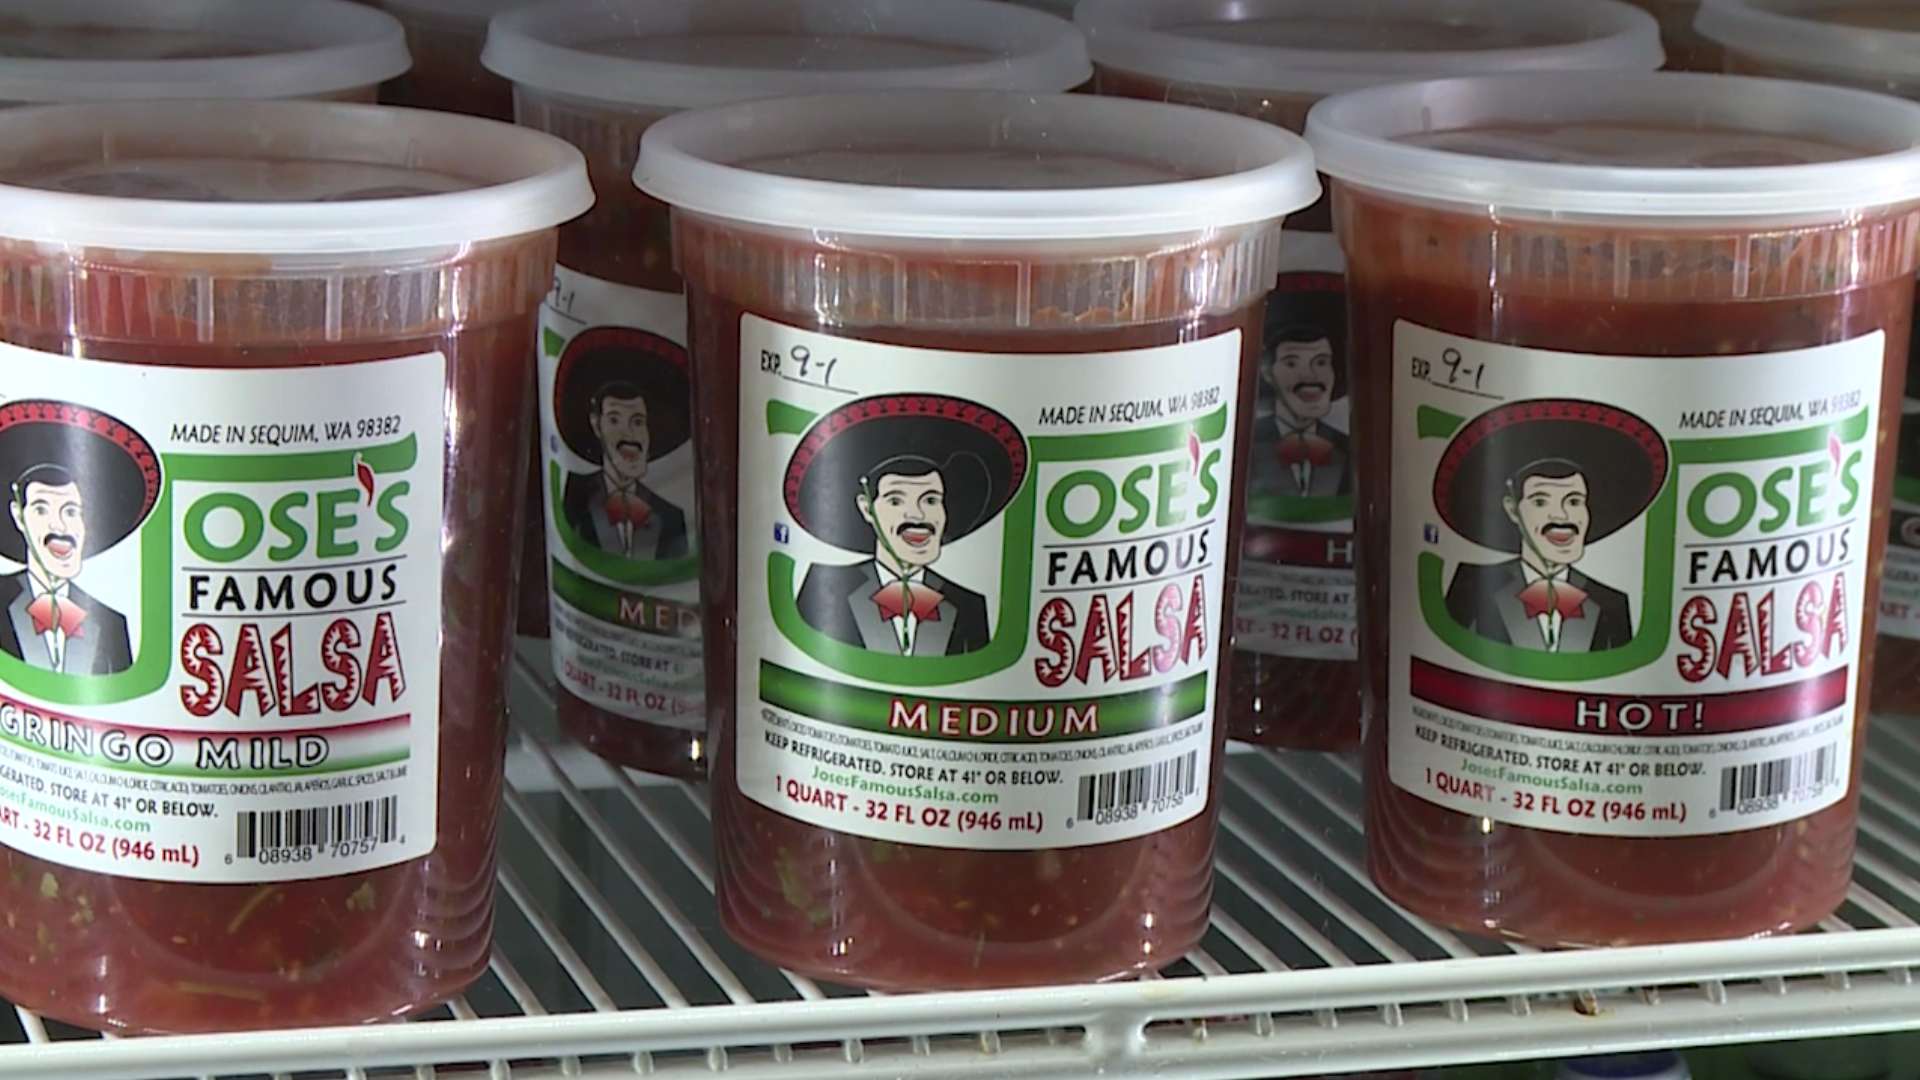 Jose Cedeno travels to Sequim for some spice, and to meet a legend. #k5evening